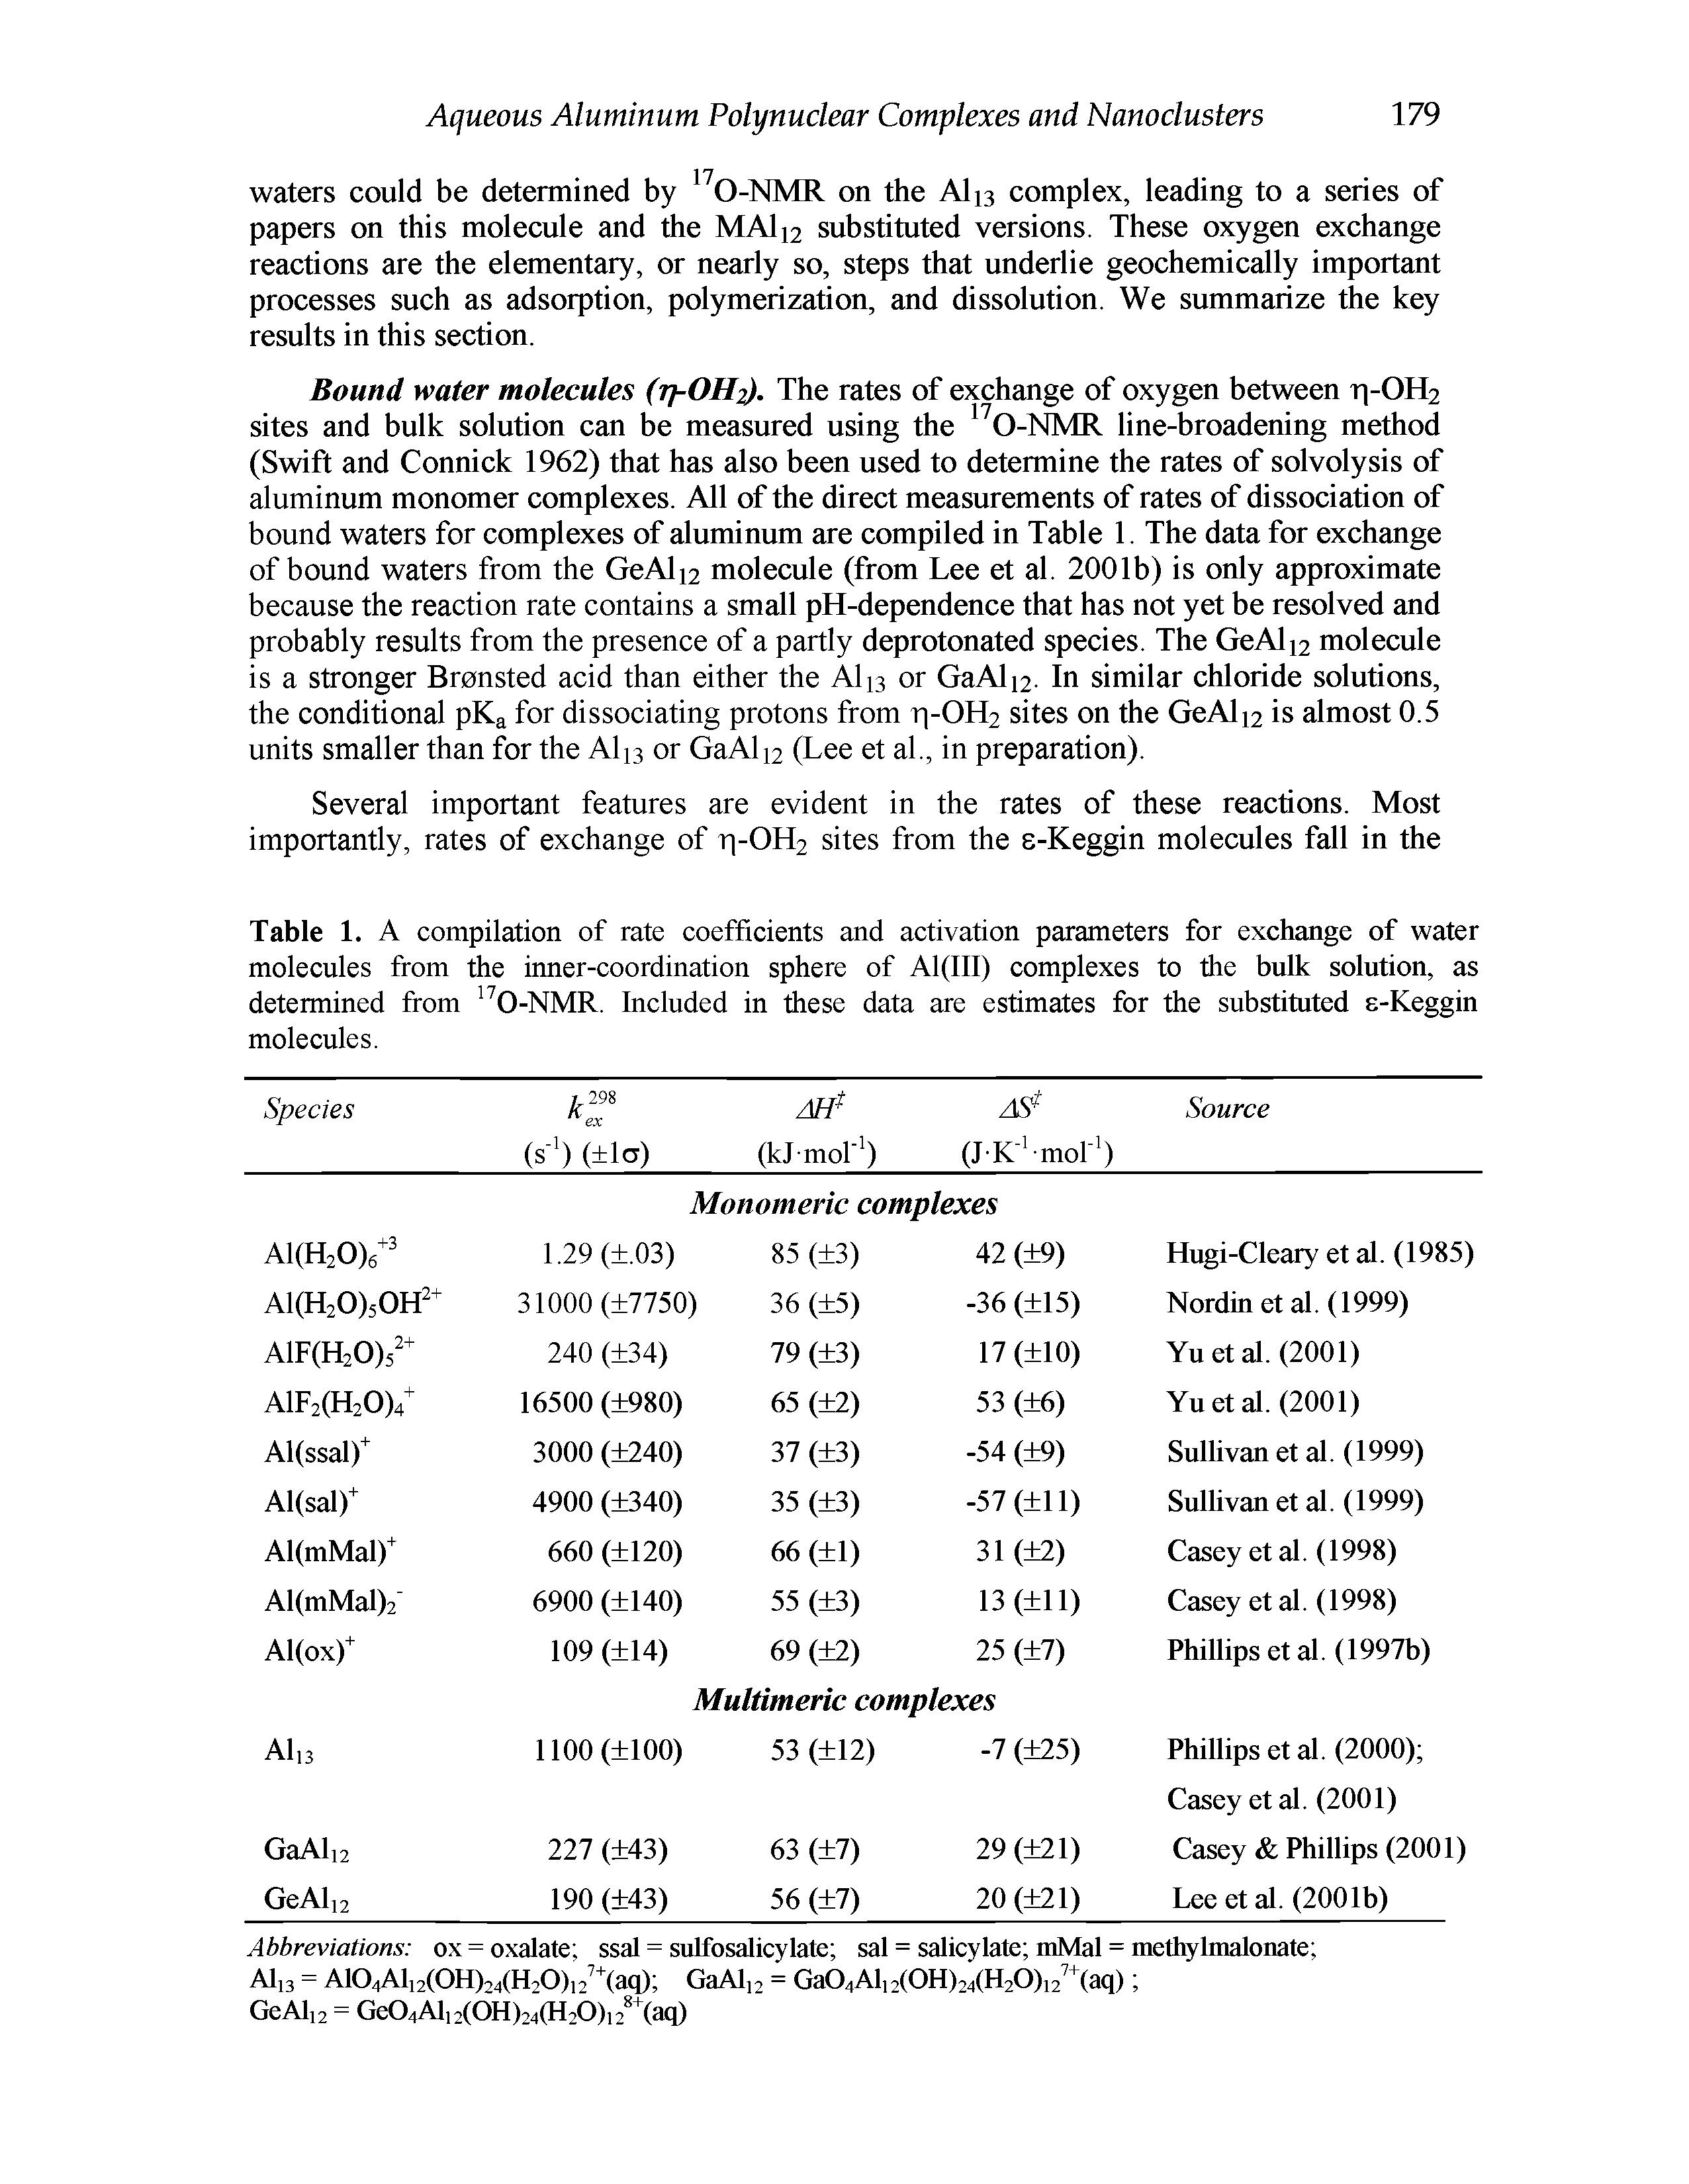 Table 1. A compilation of rate coefficients and activation parameters for exchange of water molecules from the inner-coordination sphere of Al(III) complexes to the bulk solution, as determined from 0-NMR. Included in these data are estimates for the substituted s-Keggin molecules.